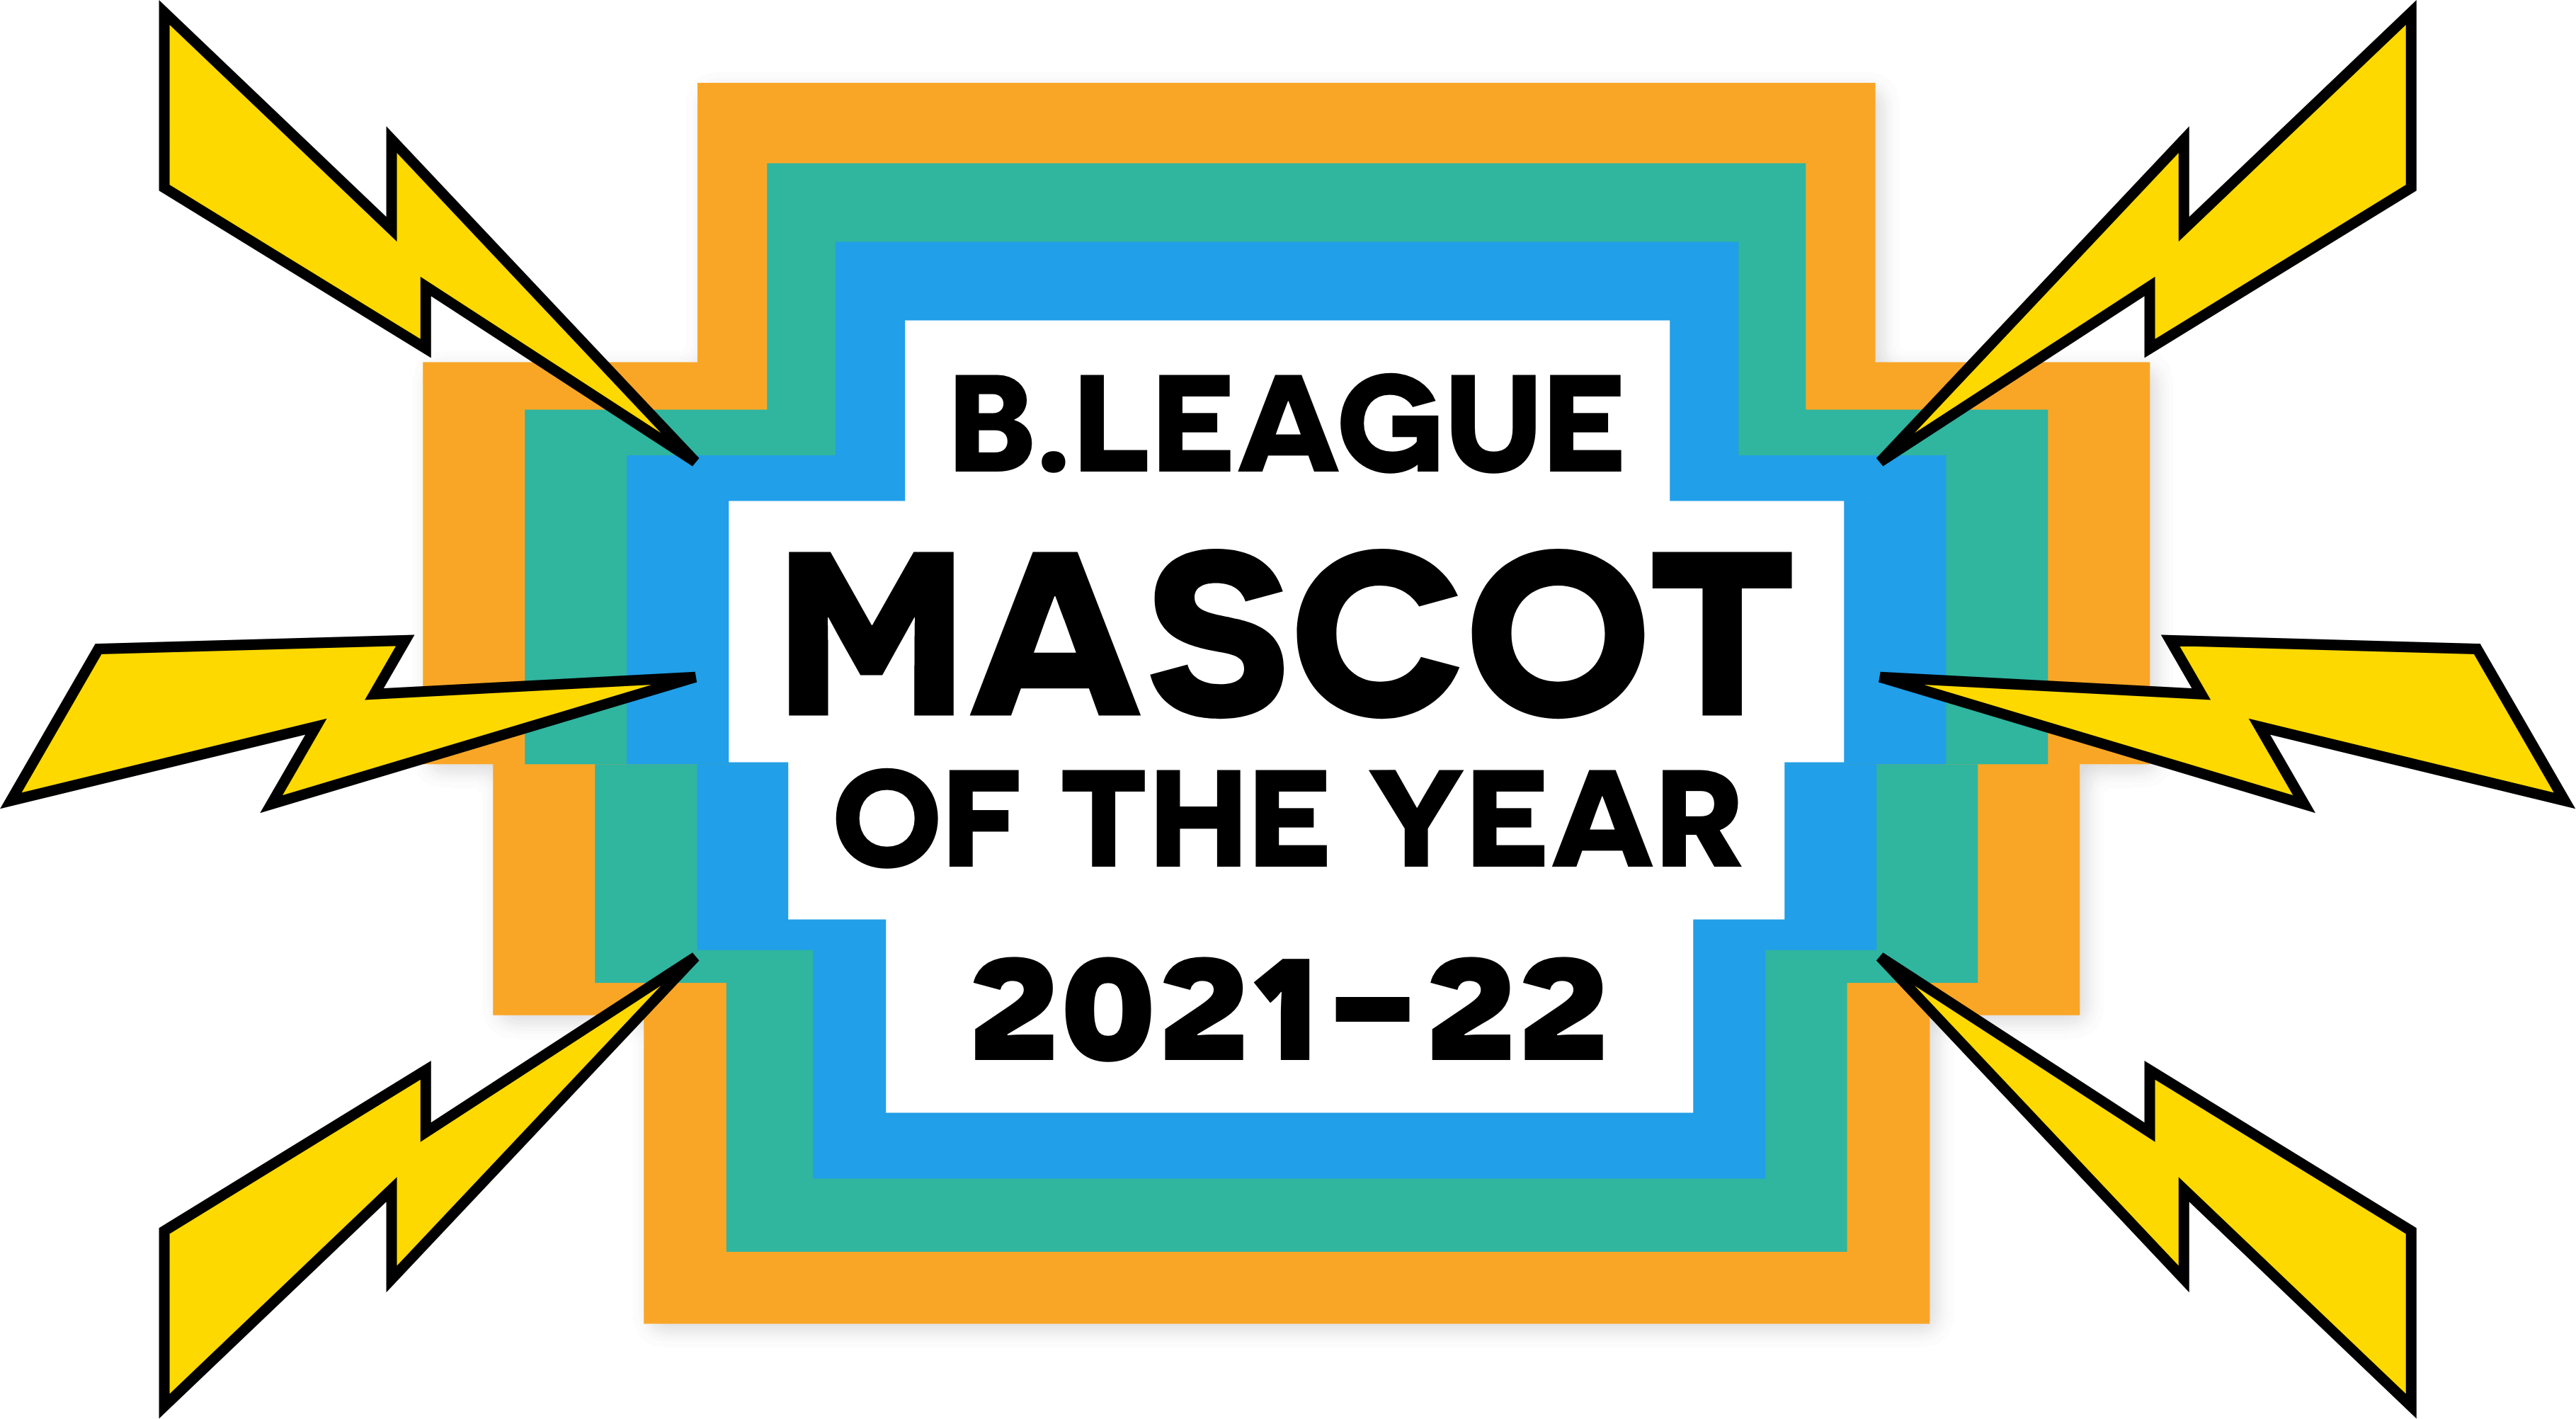 B.LEAGUE MASCOT OF THE YEAR 2021-22